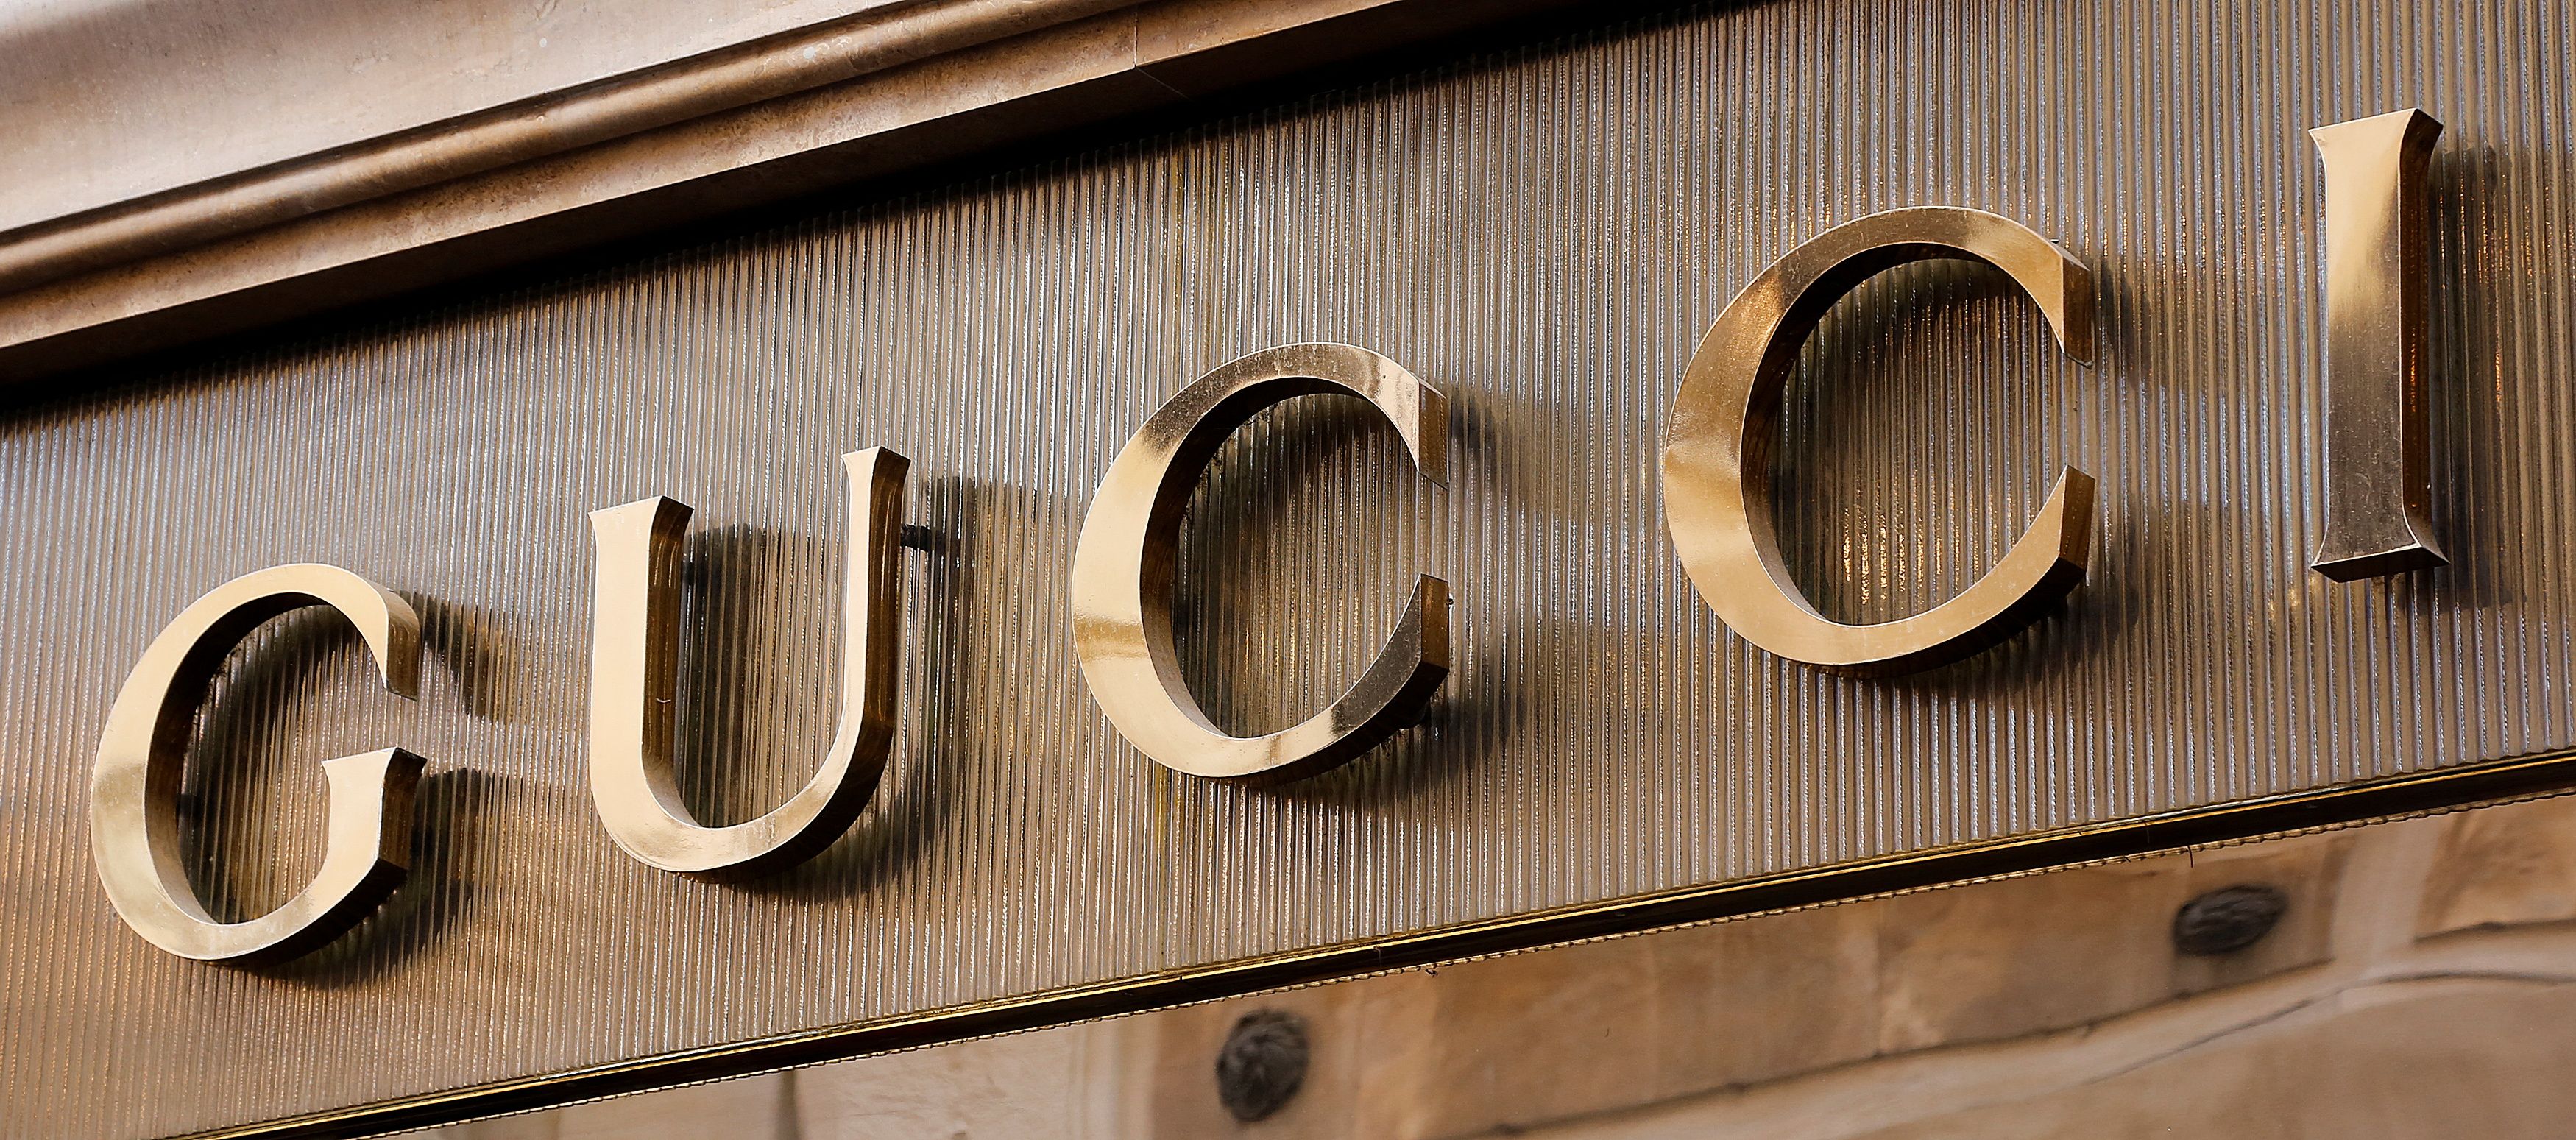 The logo of Gucci is seen in a shop in downtown Rome